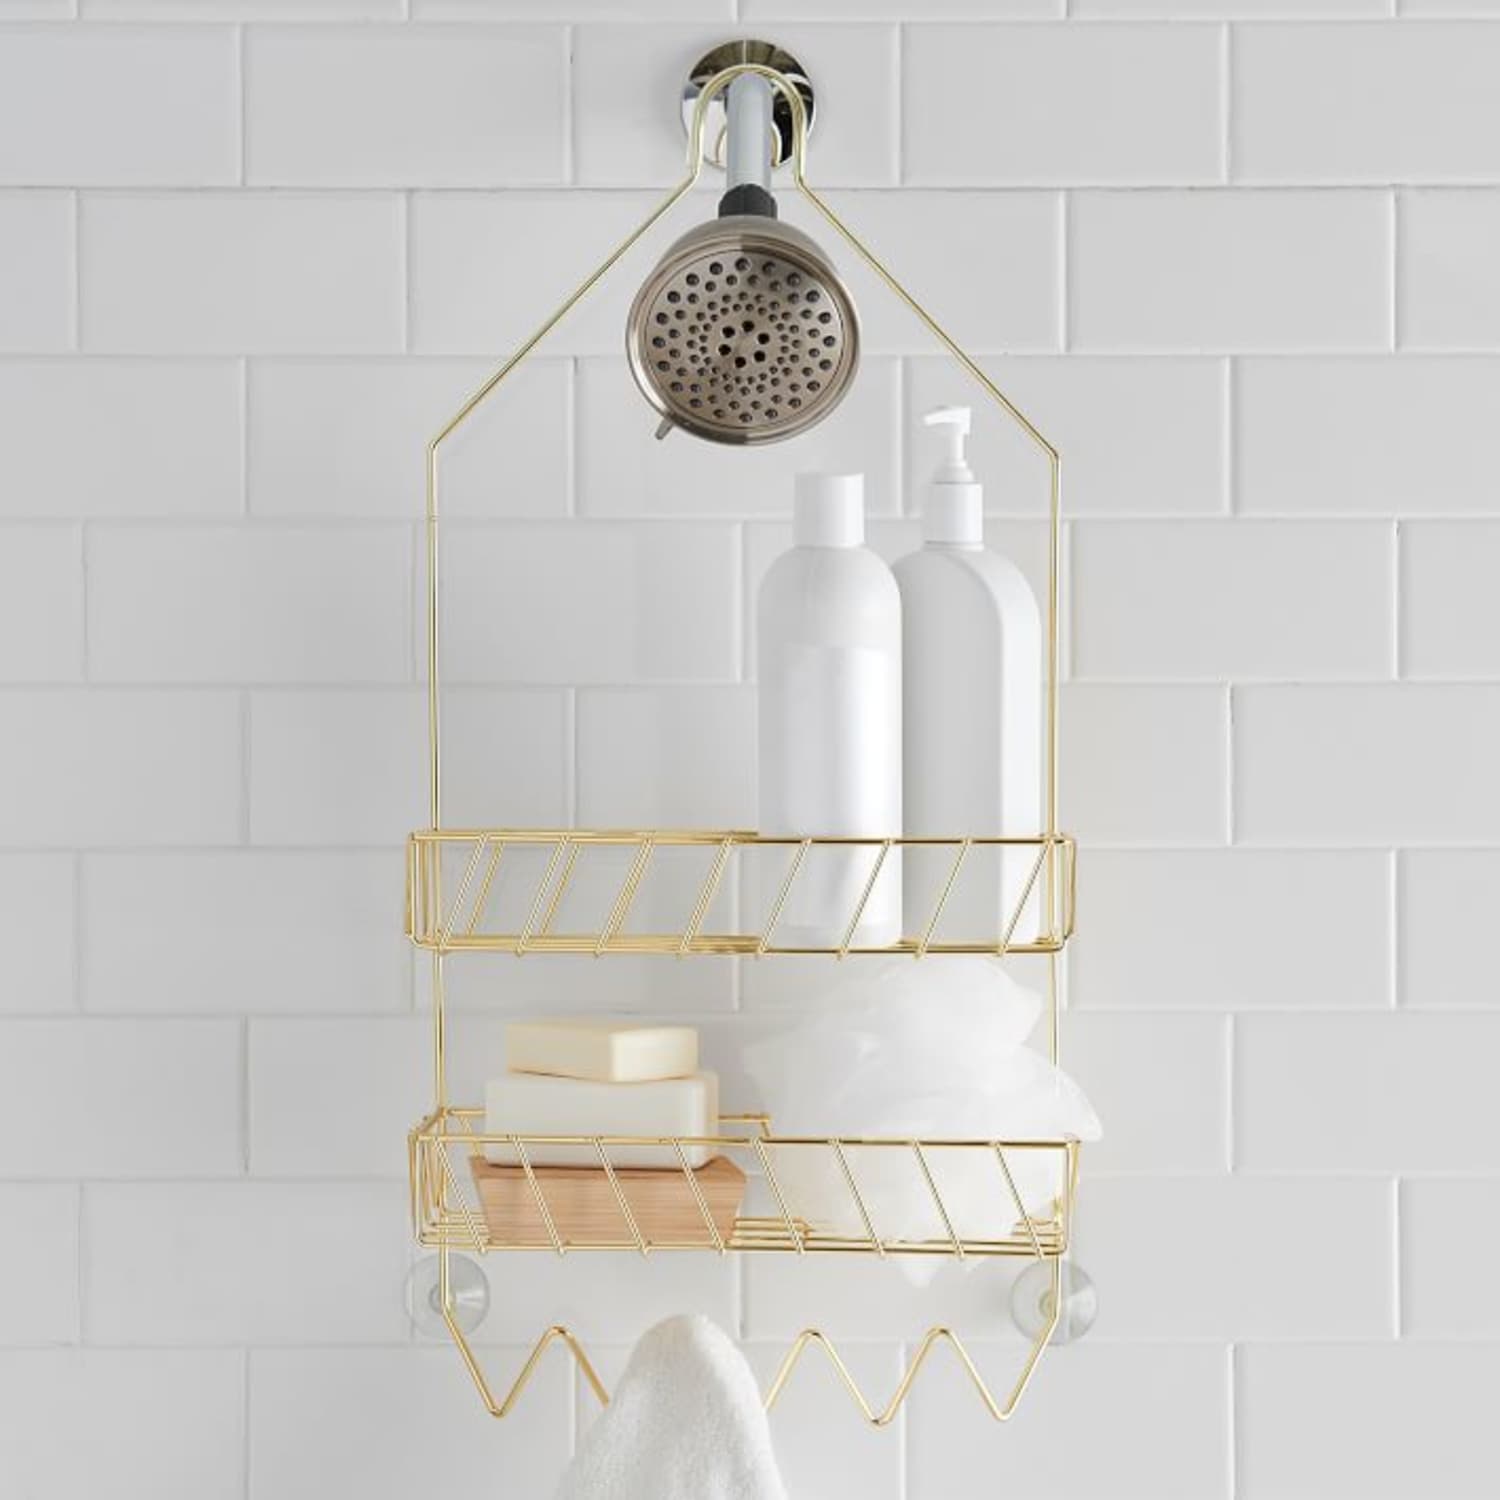 The Surprising Reason You Should Keep a Shower Caddy in Your Kitchen